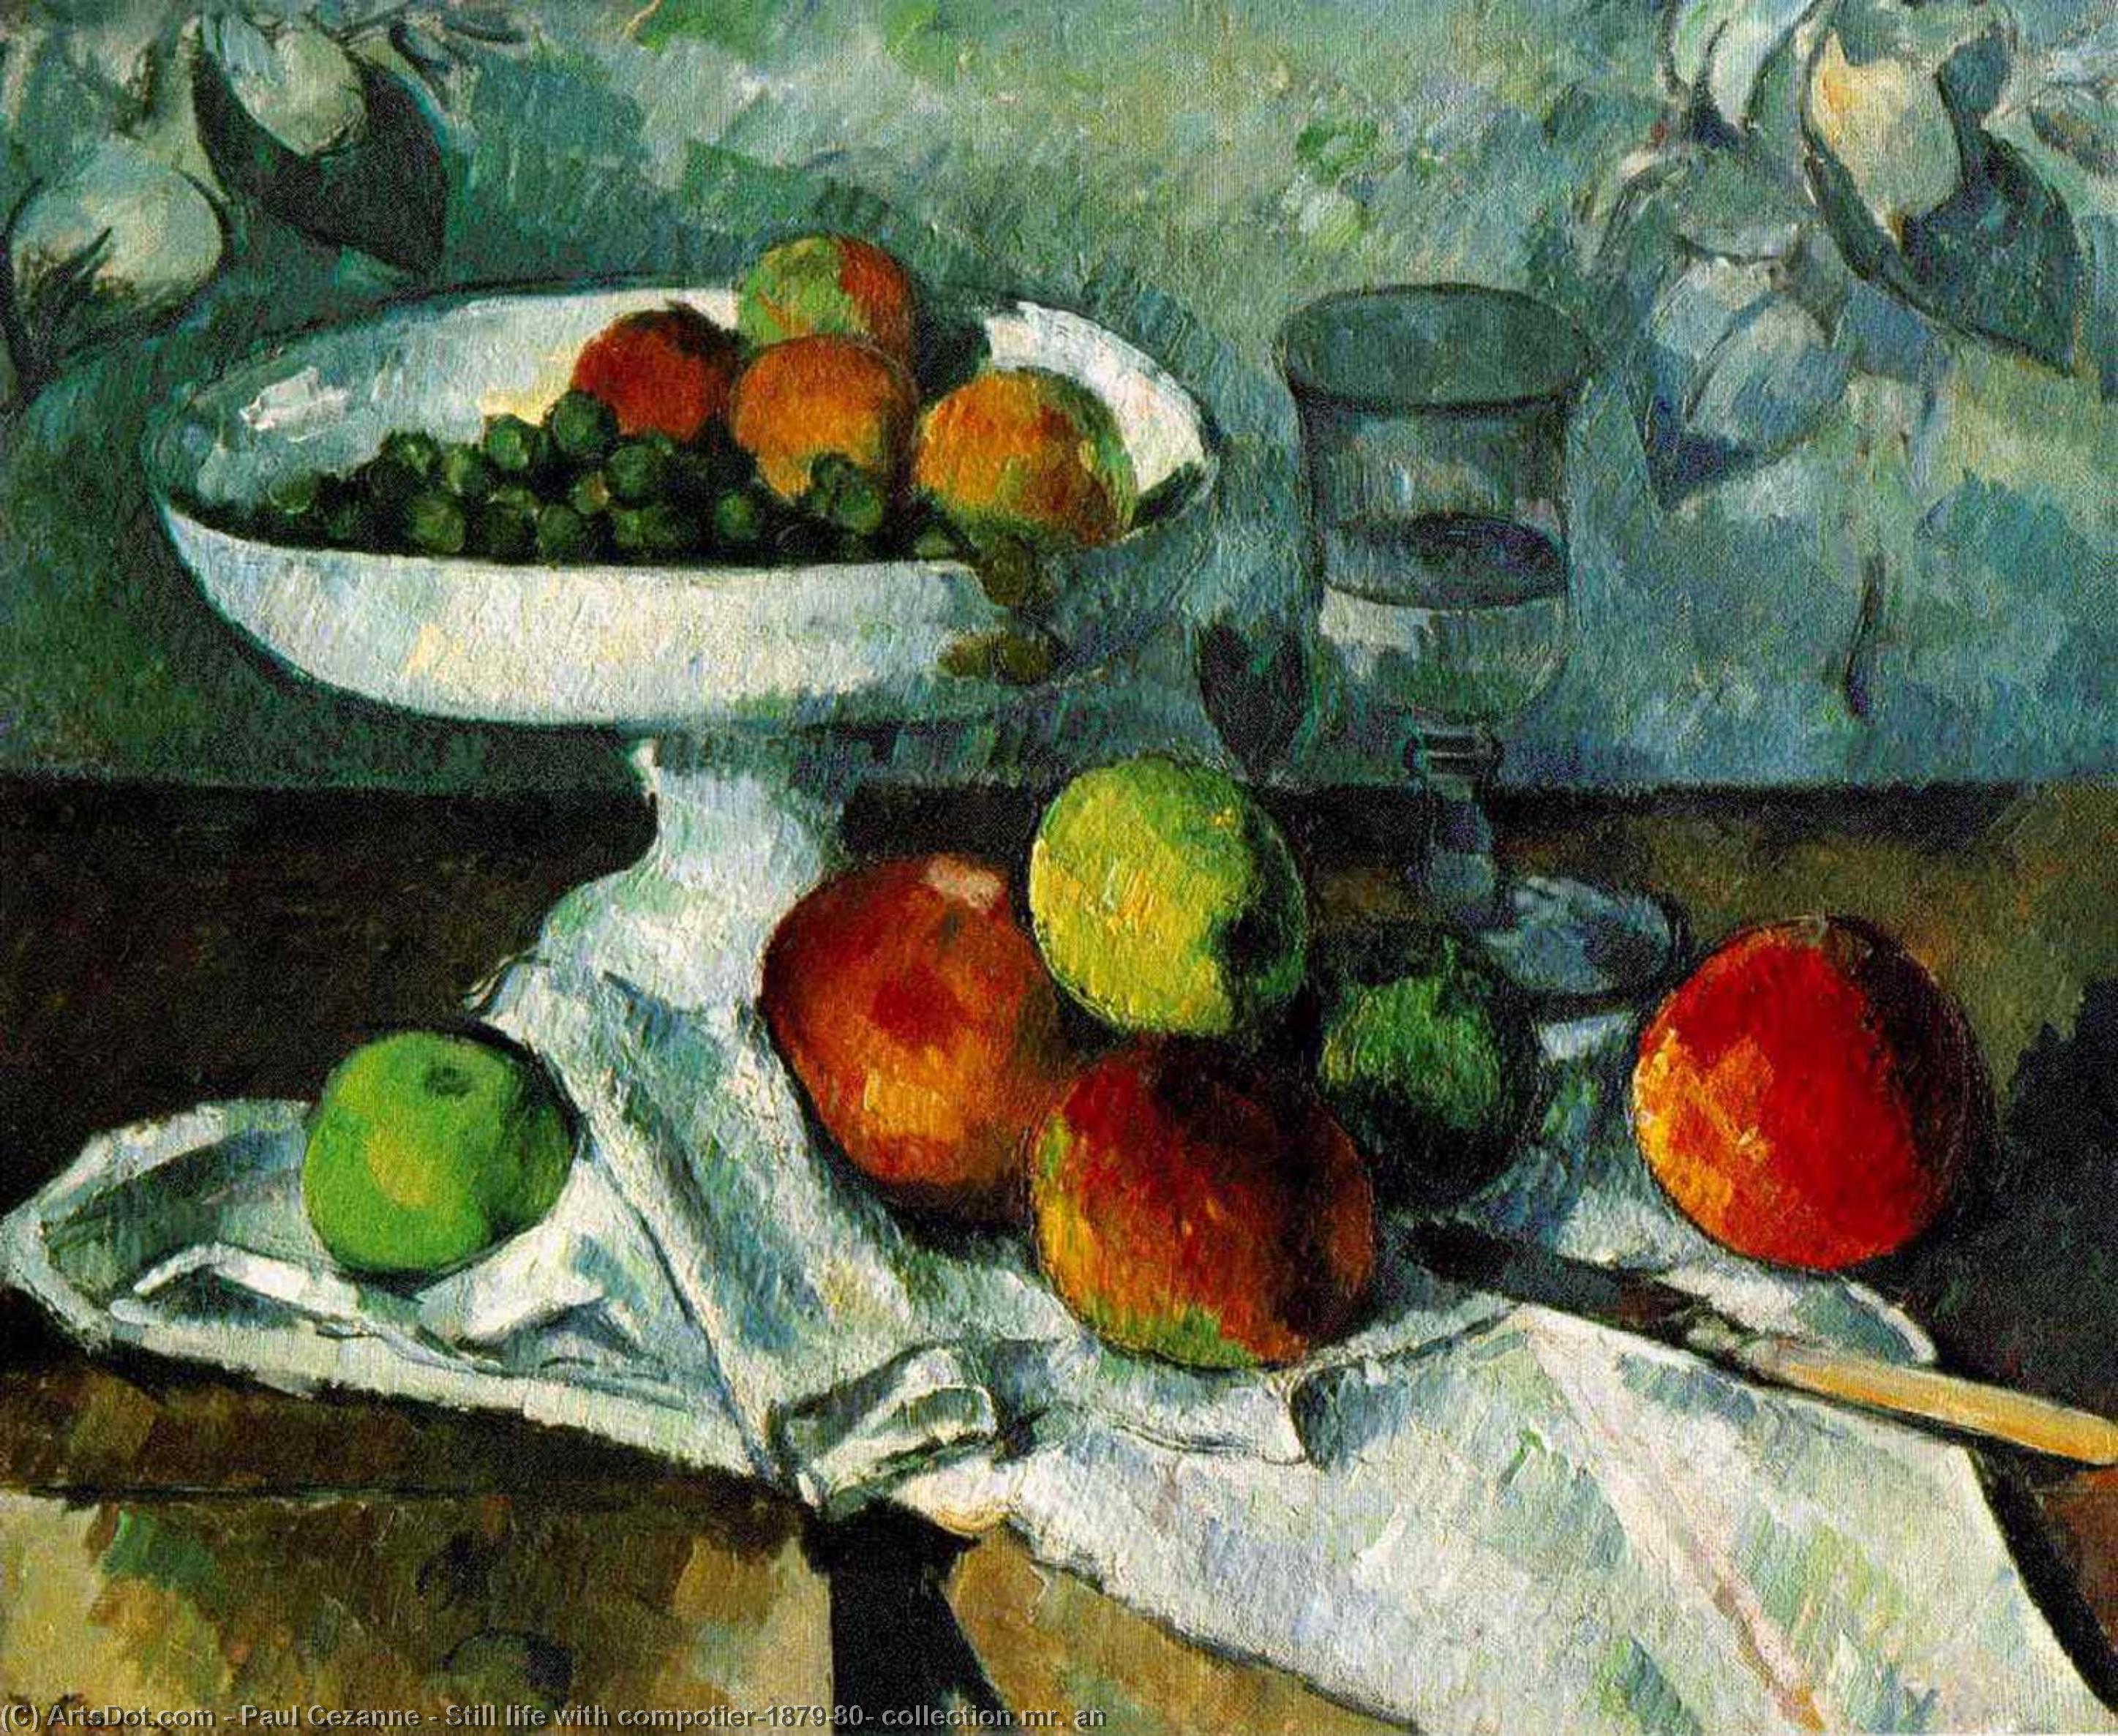 WikiOO.org - Encyclopedia of Fine Arts - Malba, Artwork Paul Cezanne - Still life with compotier,1879-80, collection mr. an